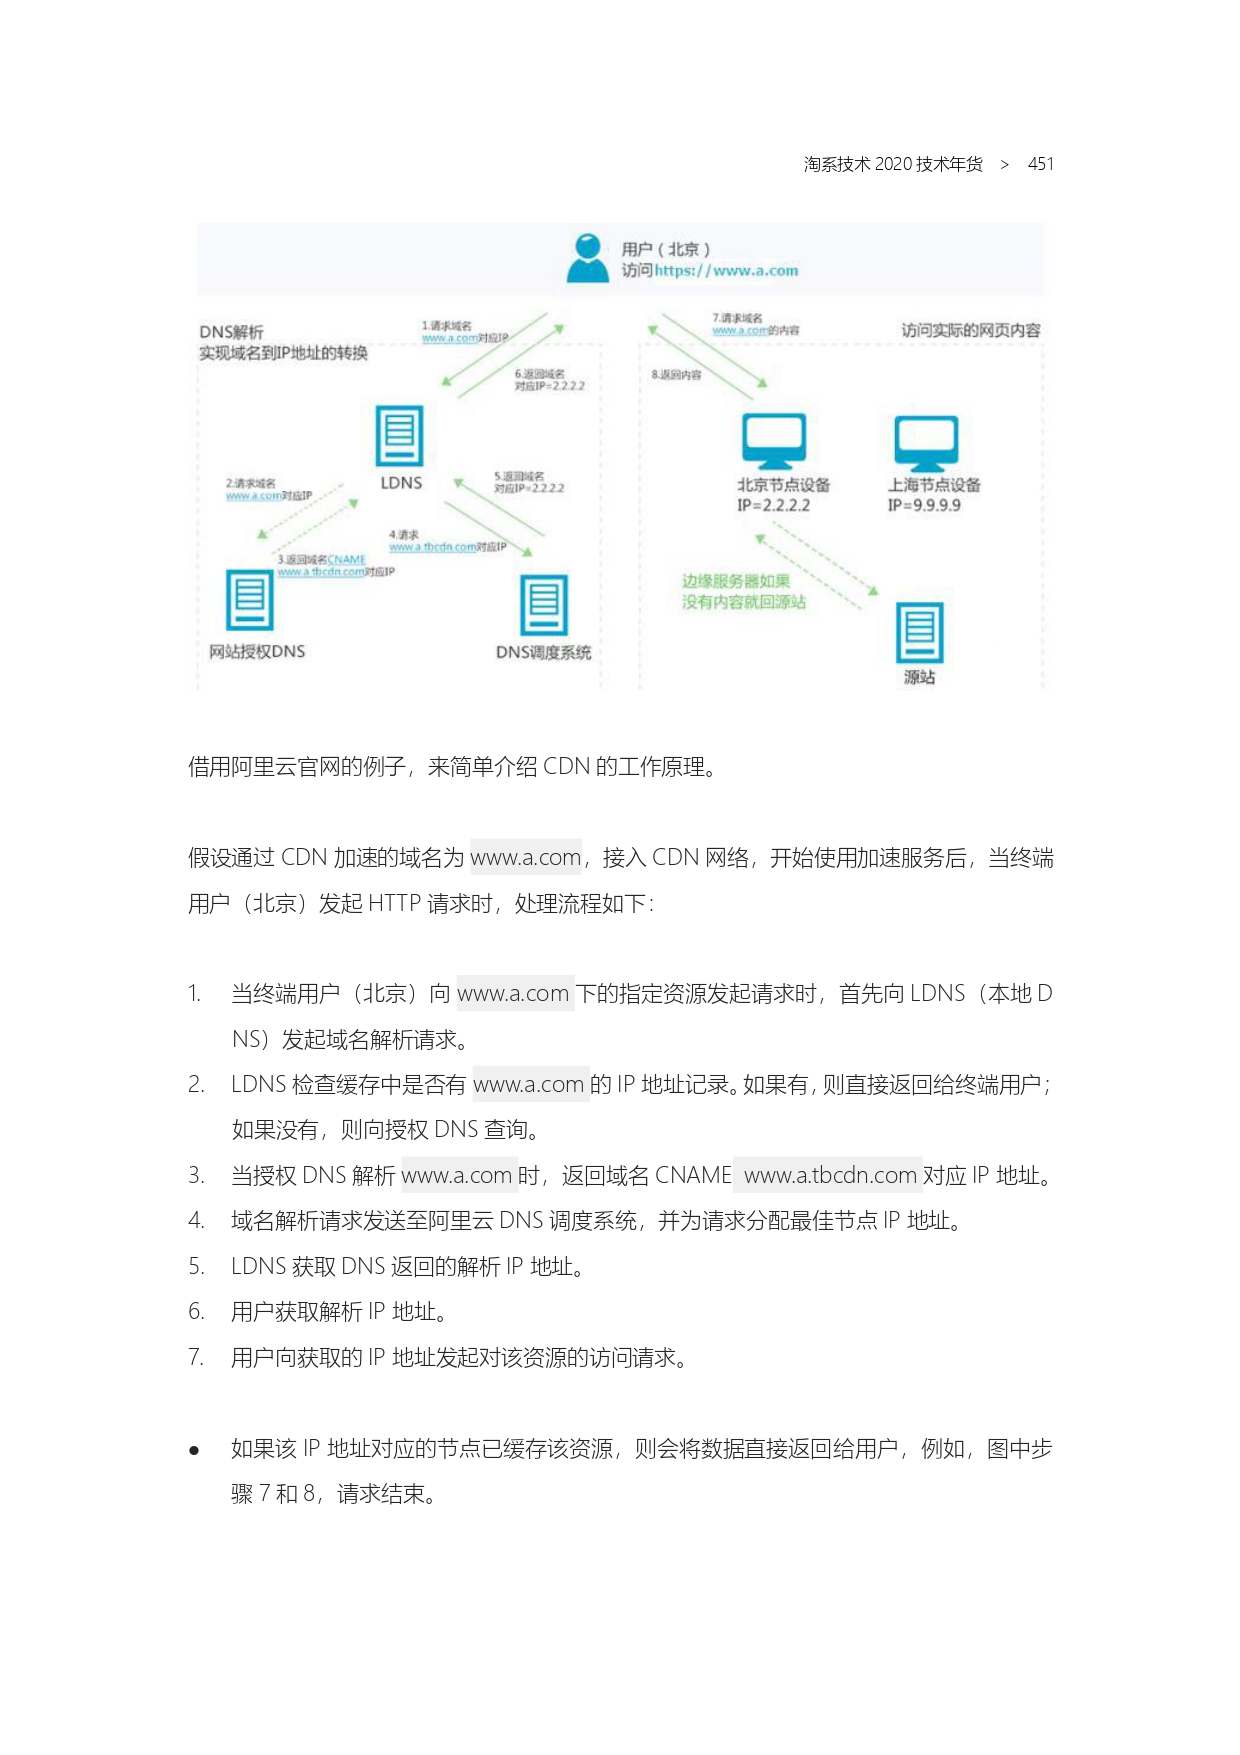 The Complete Works of Tao Technology 2020-1-570_page-0451.jpg